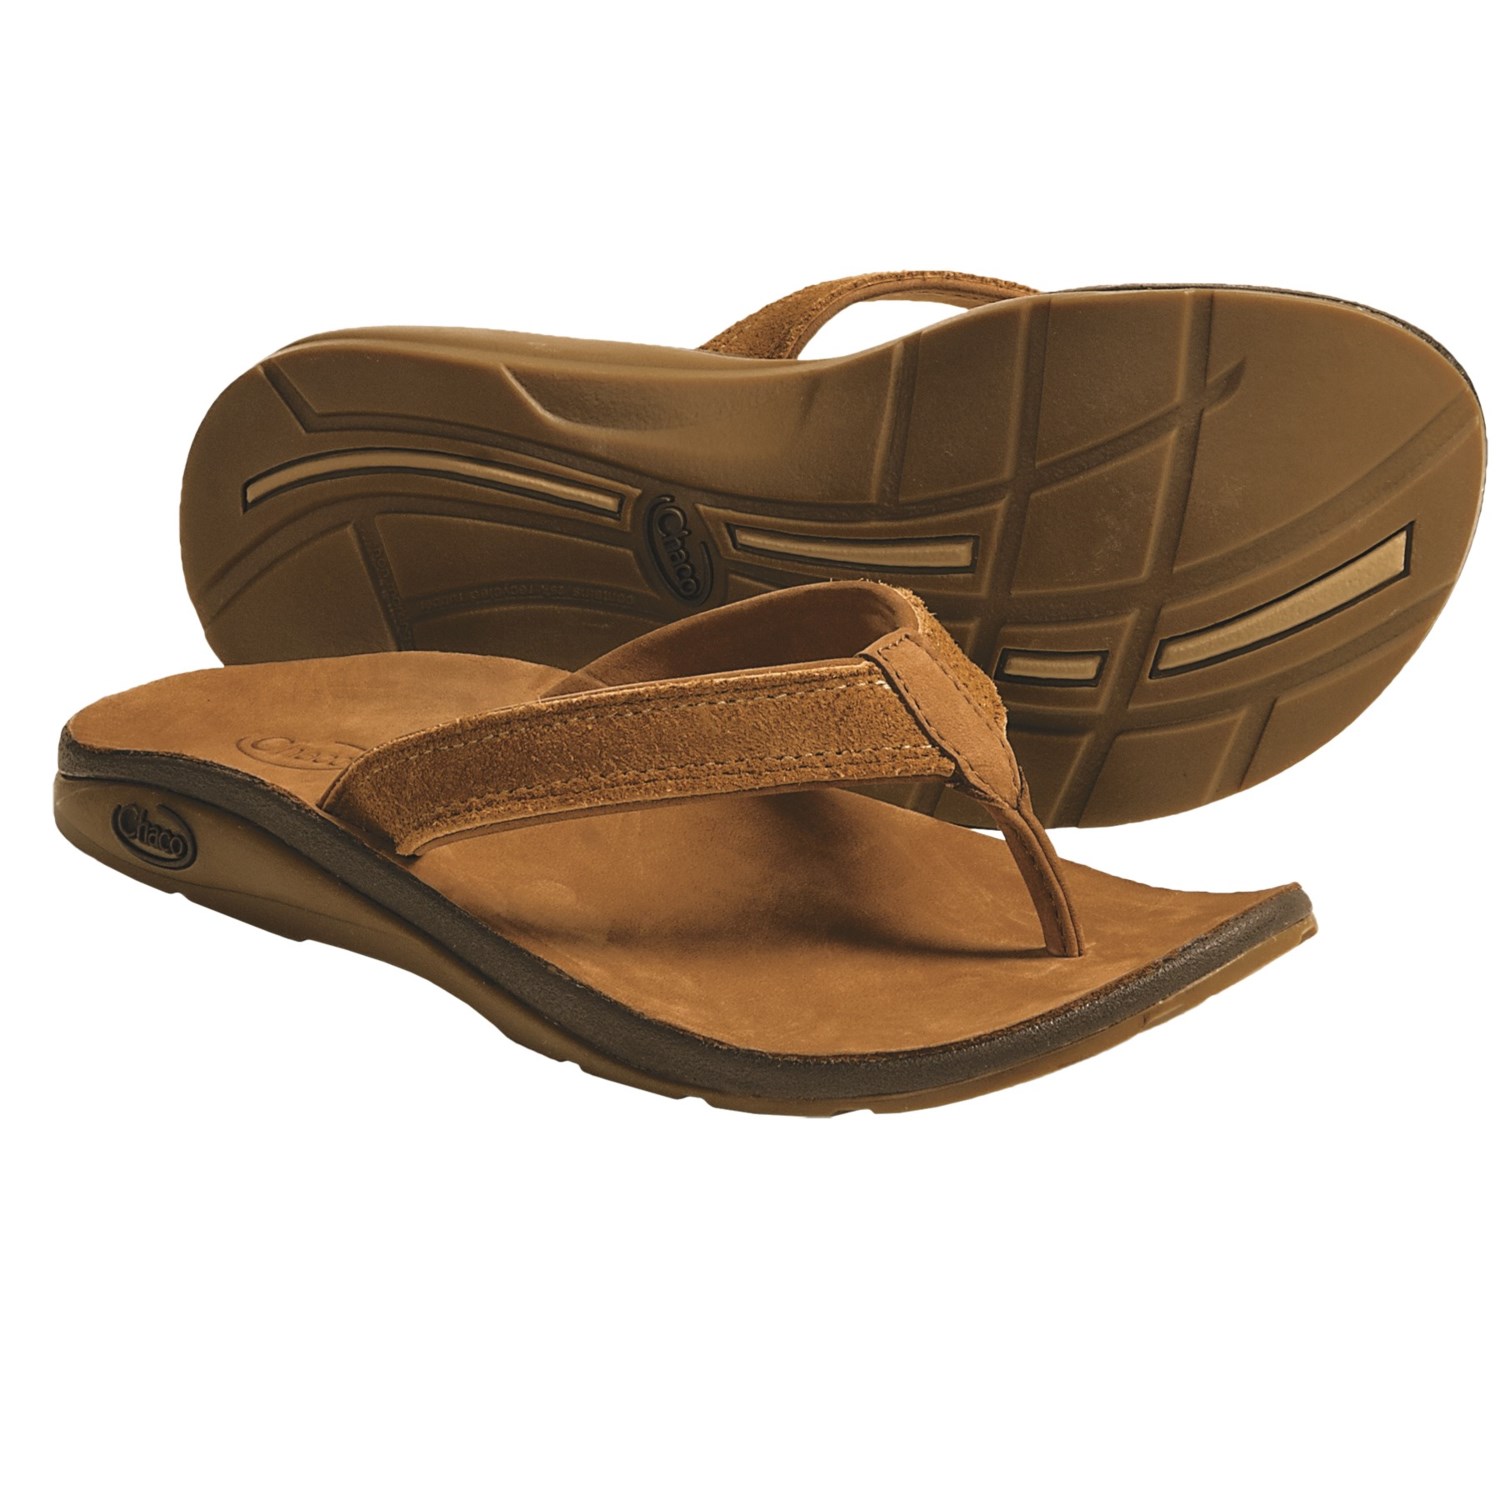 Chaco Flippa EcoTread Thong Sandals - Flip-Flops, Leather, Recycled ...